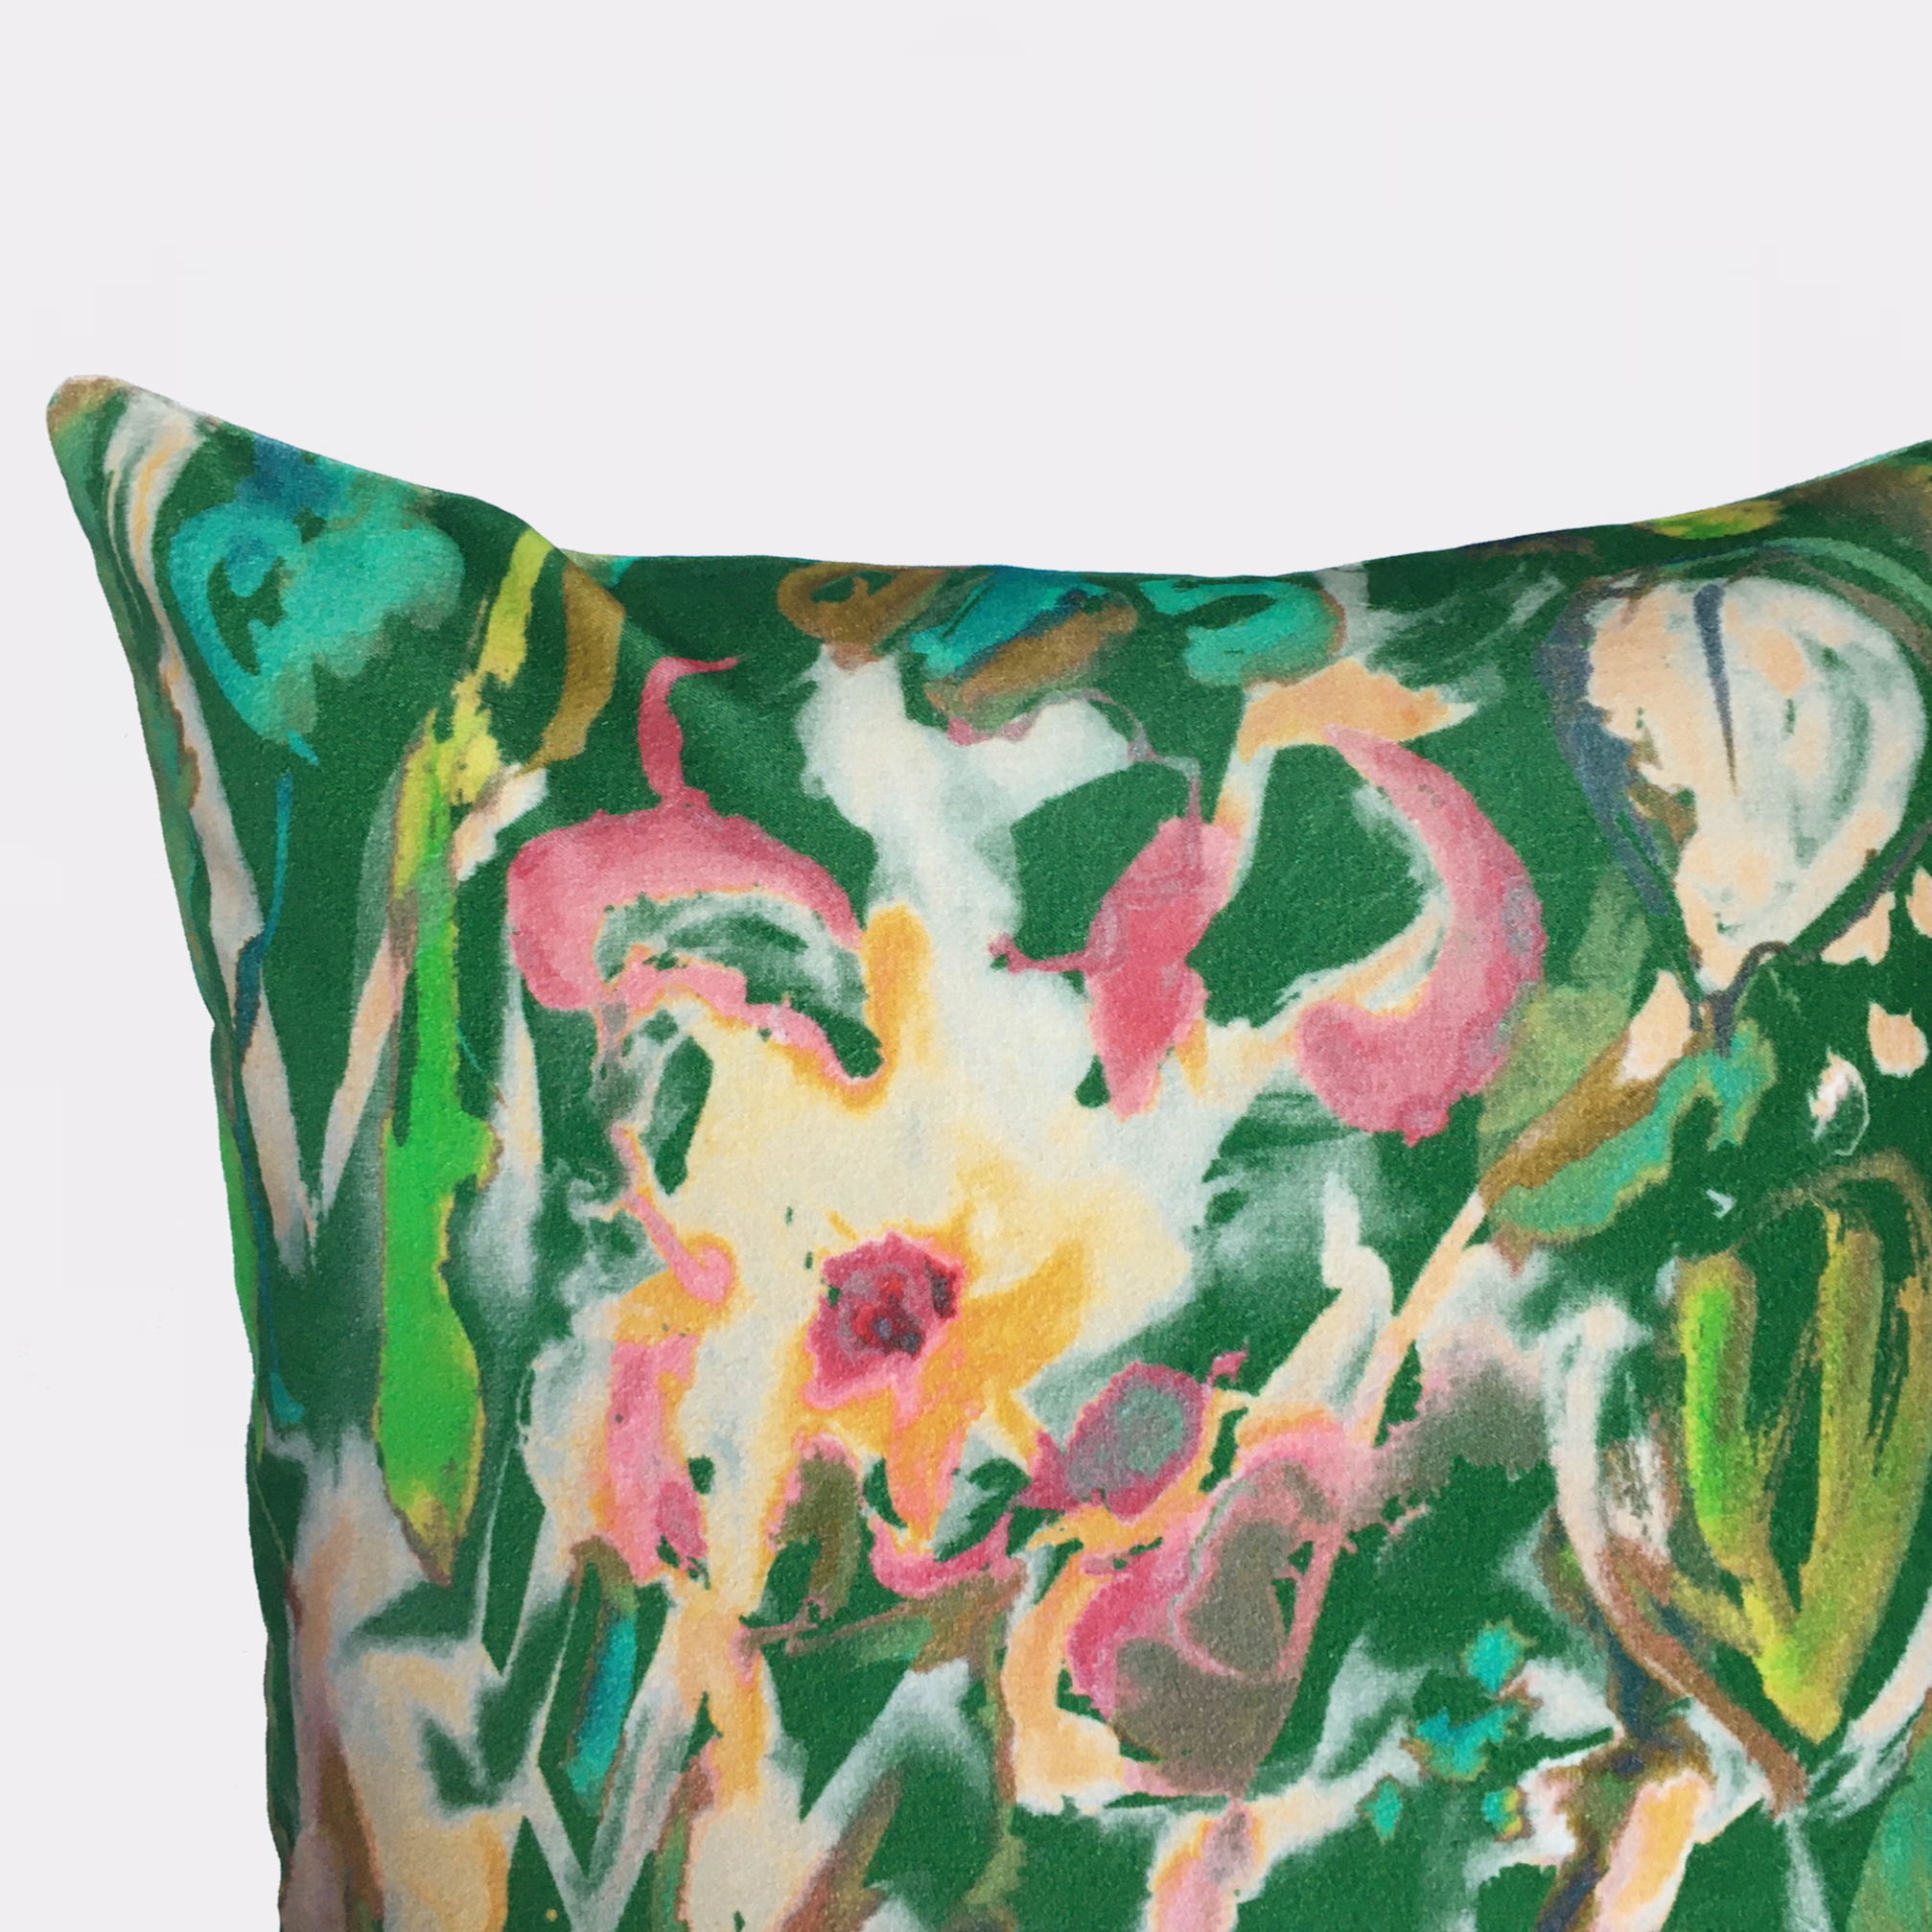 Abstract Floral Velvet Cushion - Green